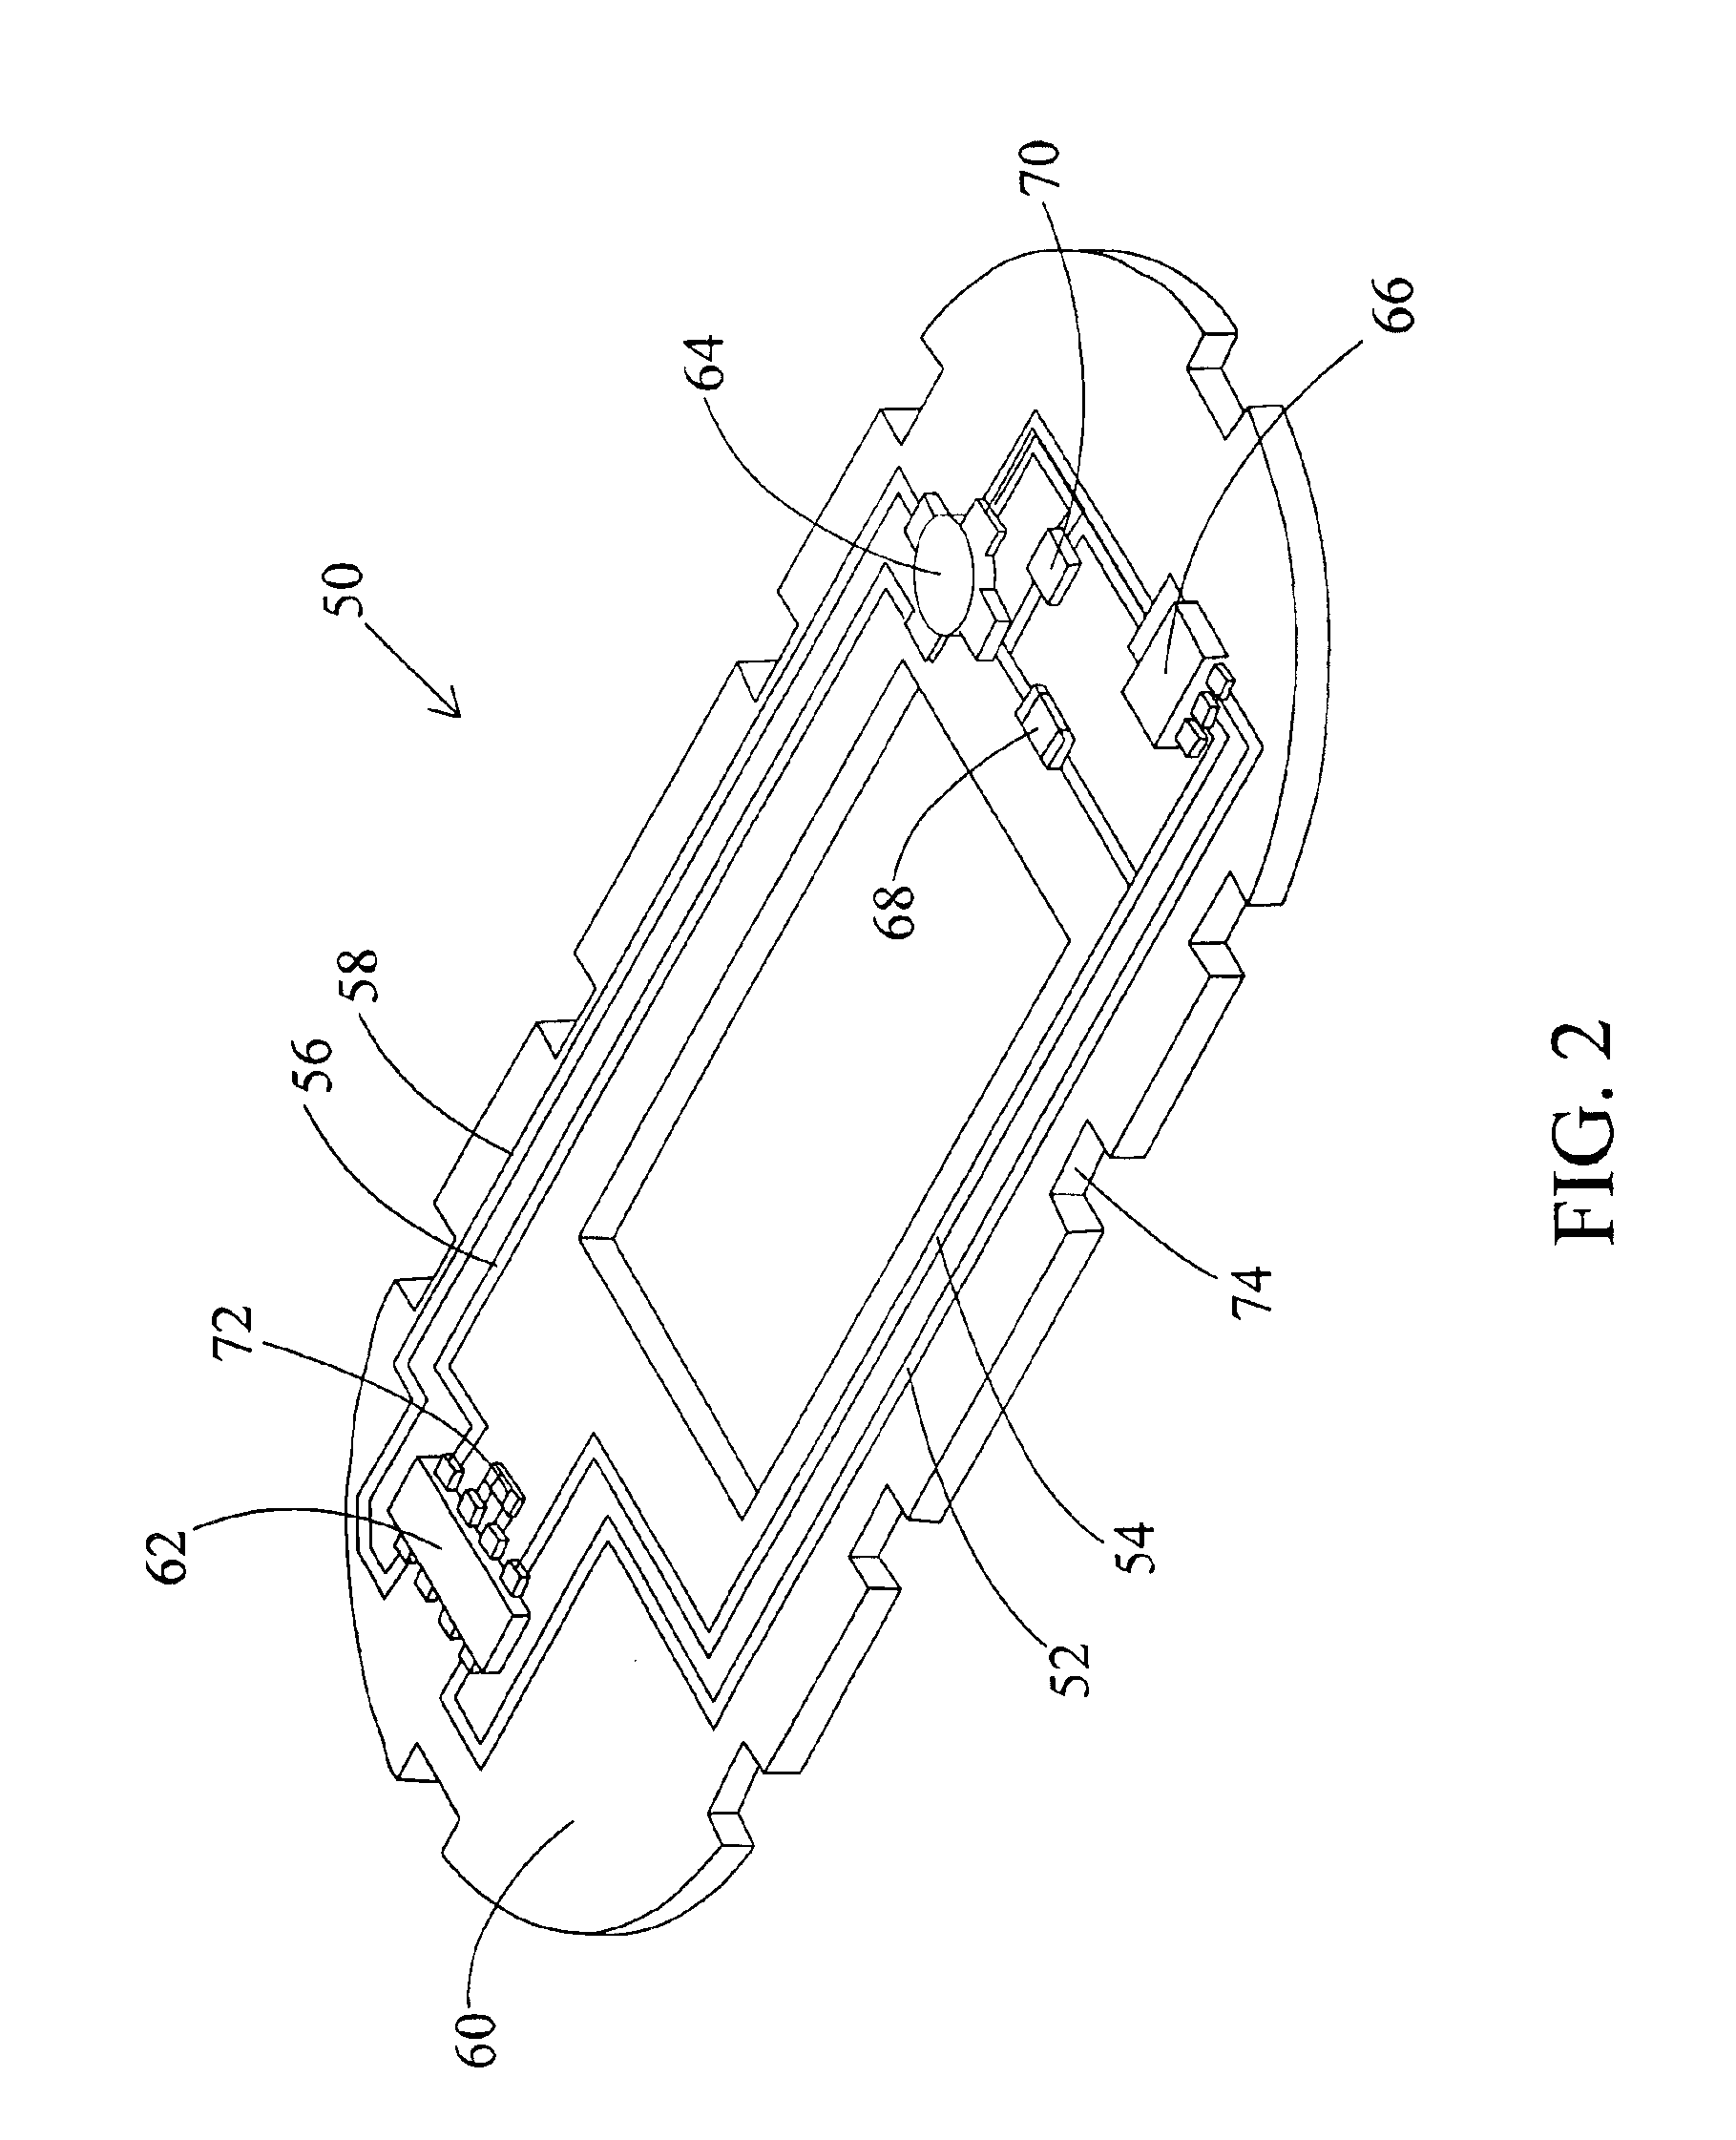 Unmanned aerial vehicle apparatus, system and method for retrieving data